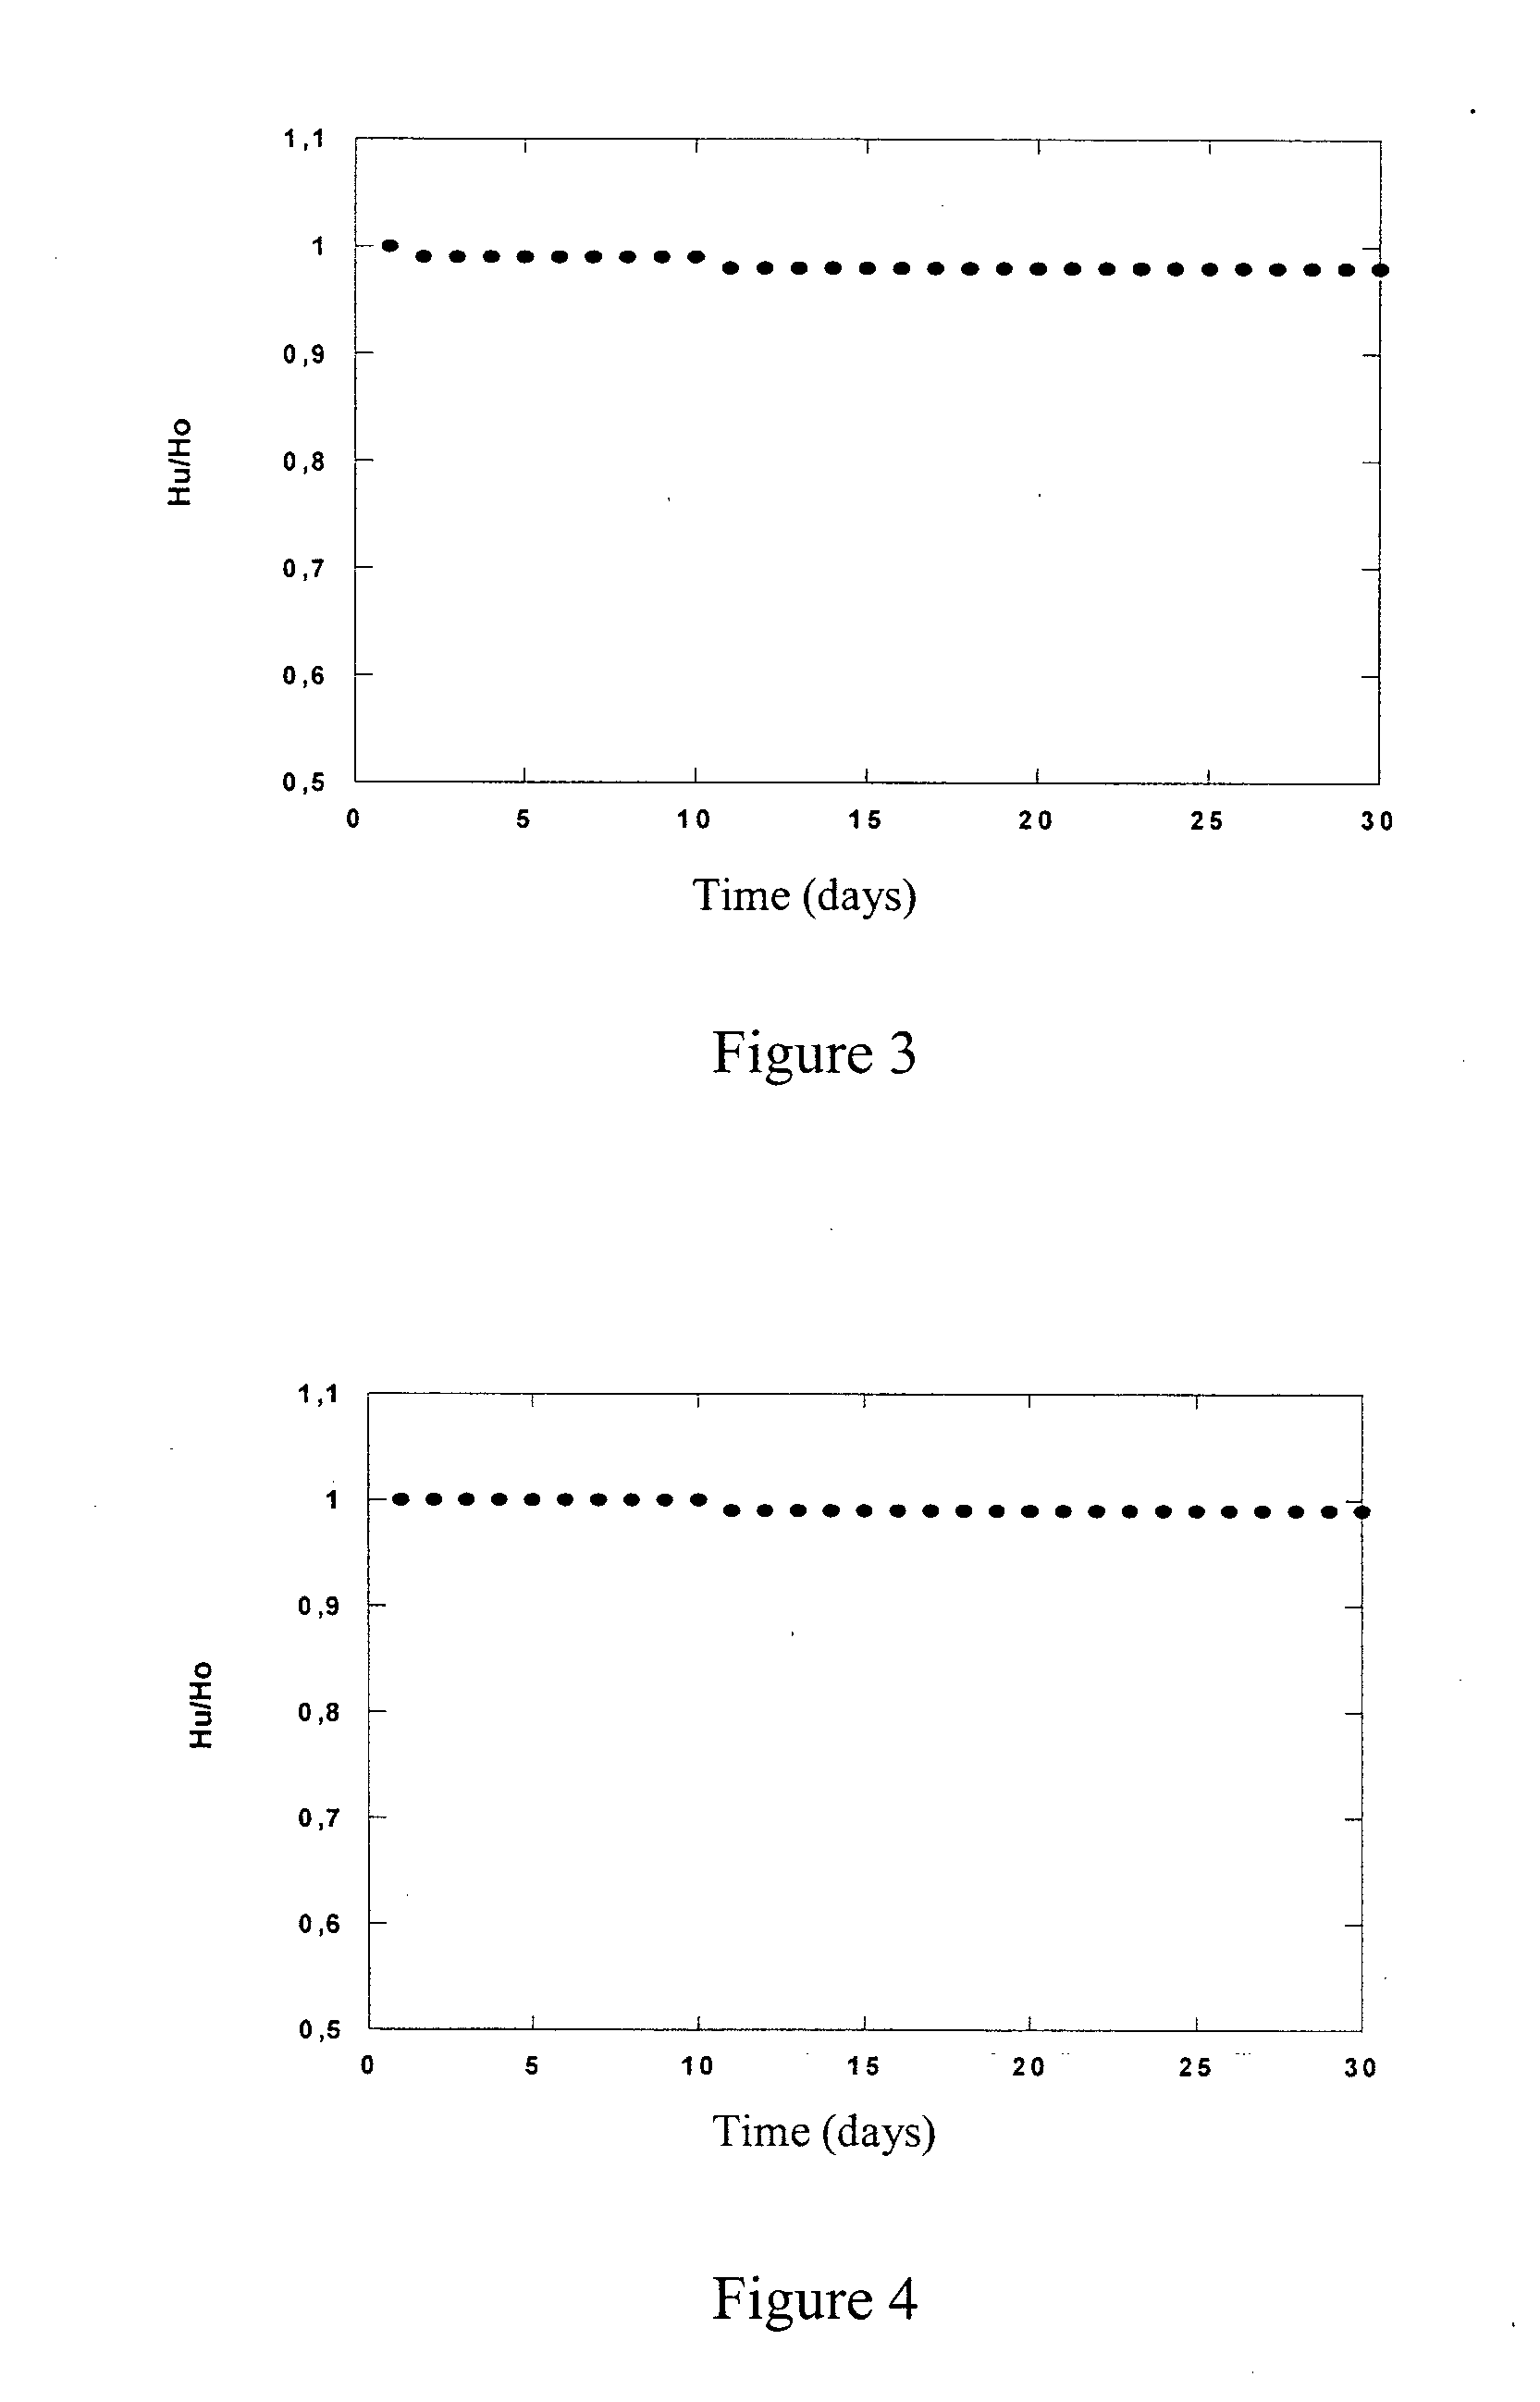 Sprayable pharmaceutical compositions for topical application comprising sucralfate gel